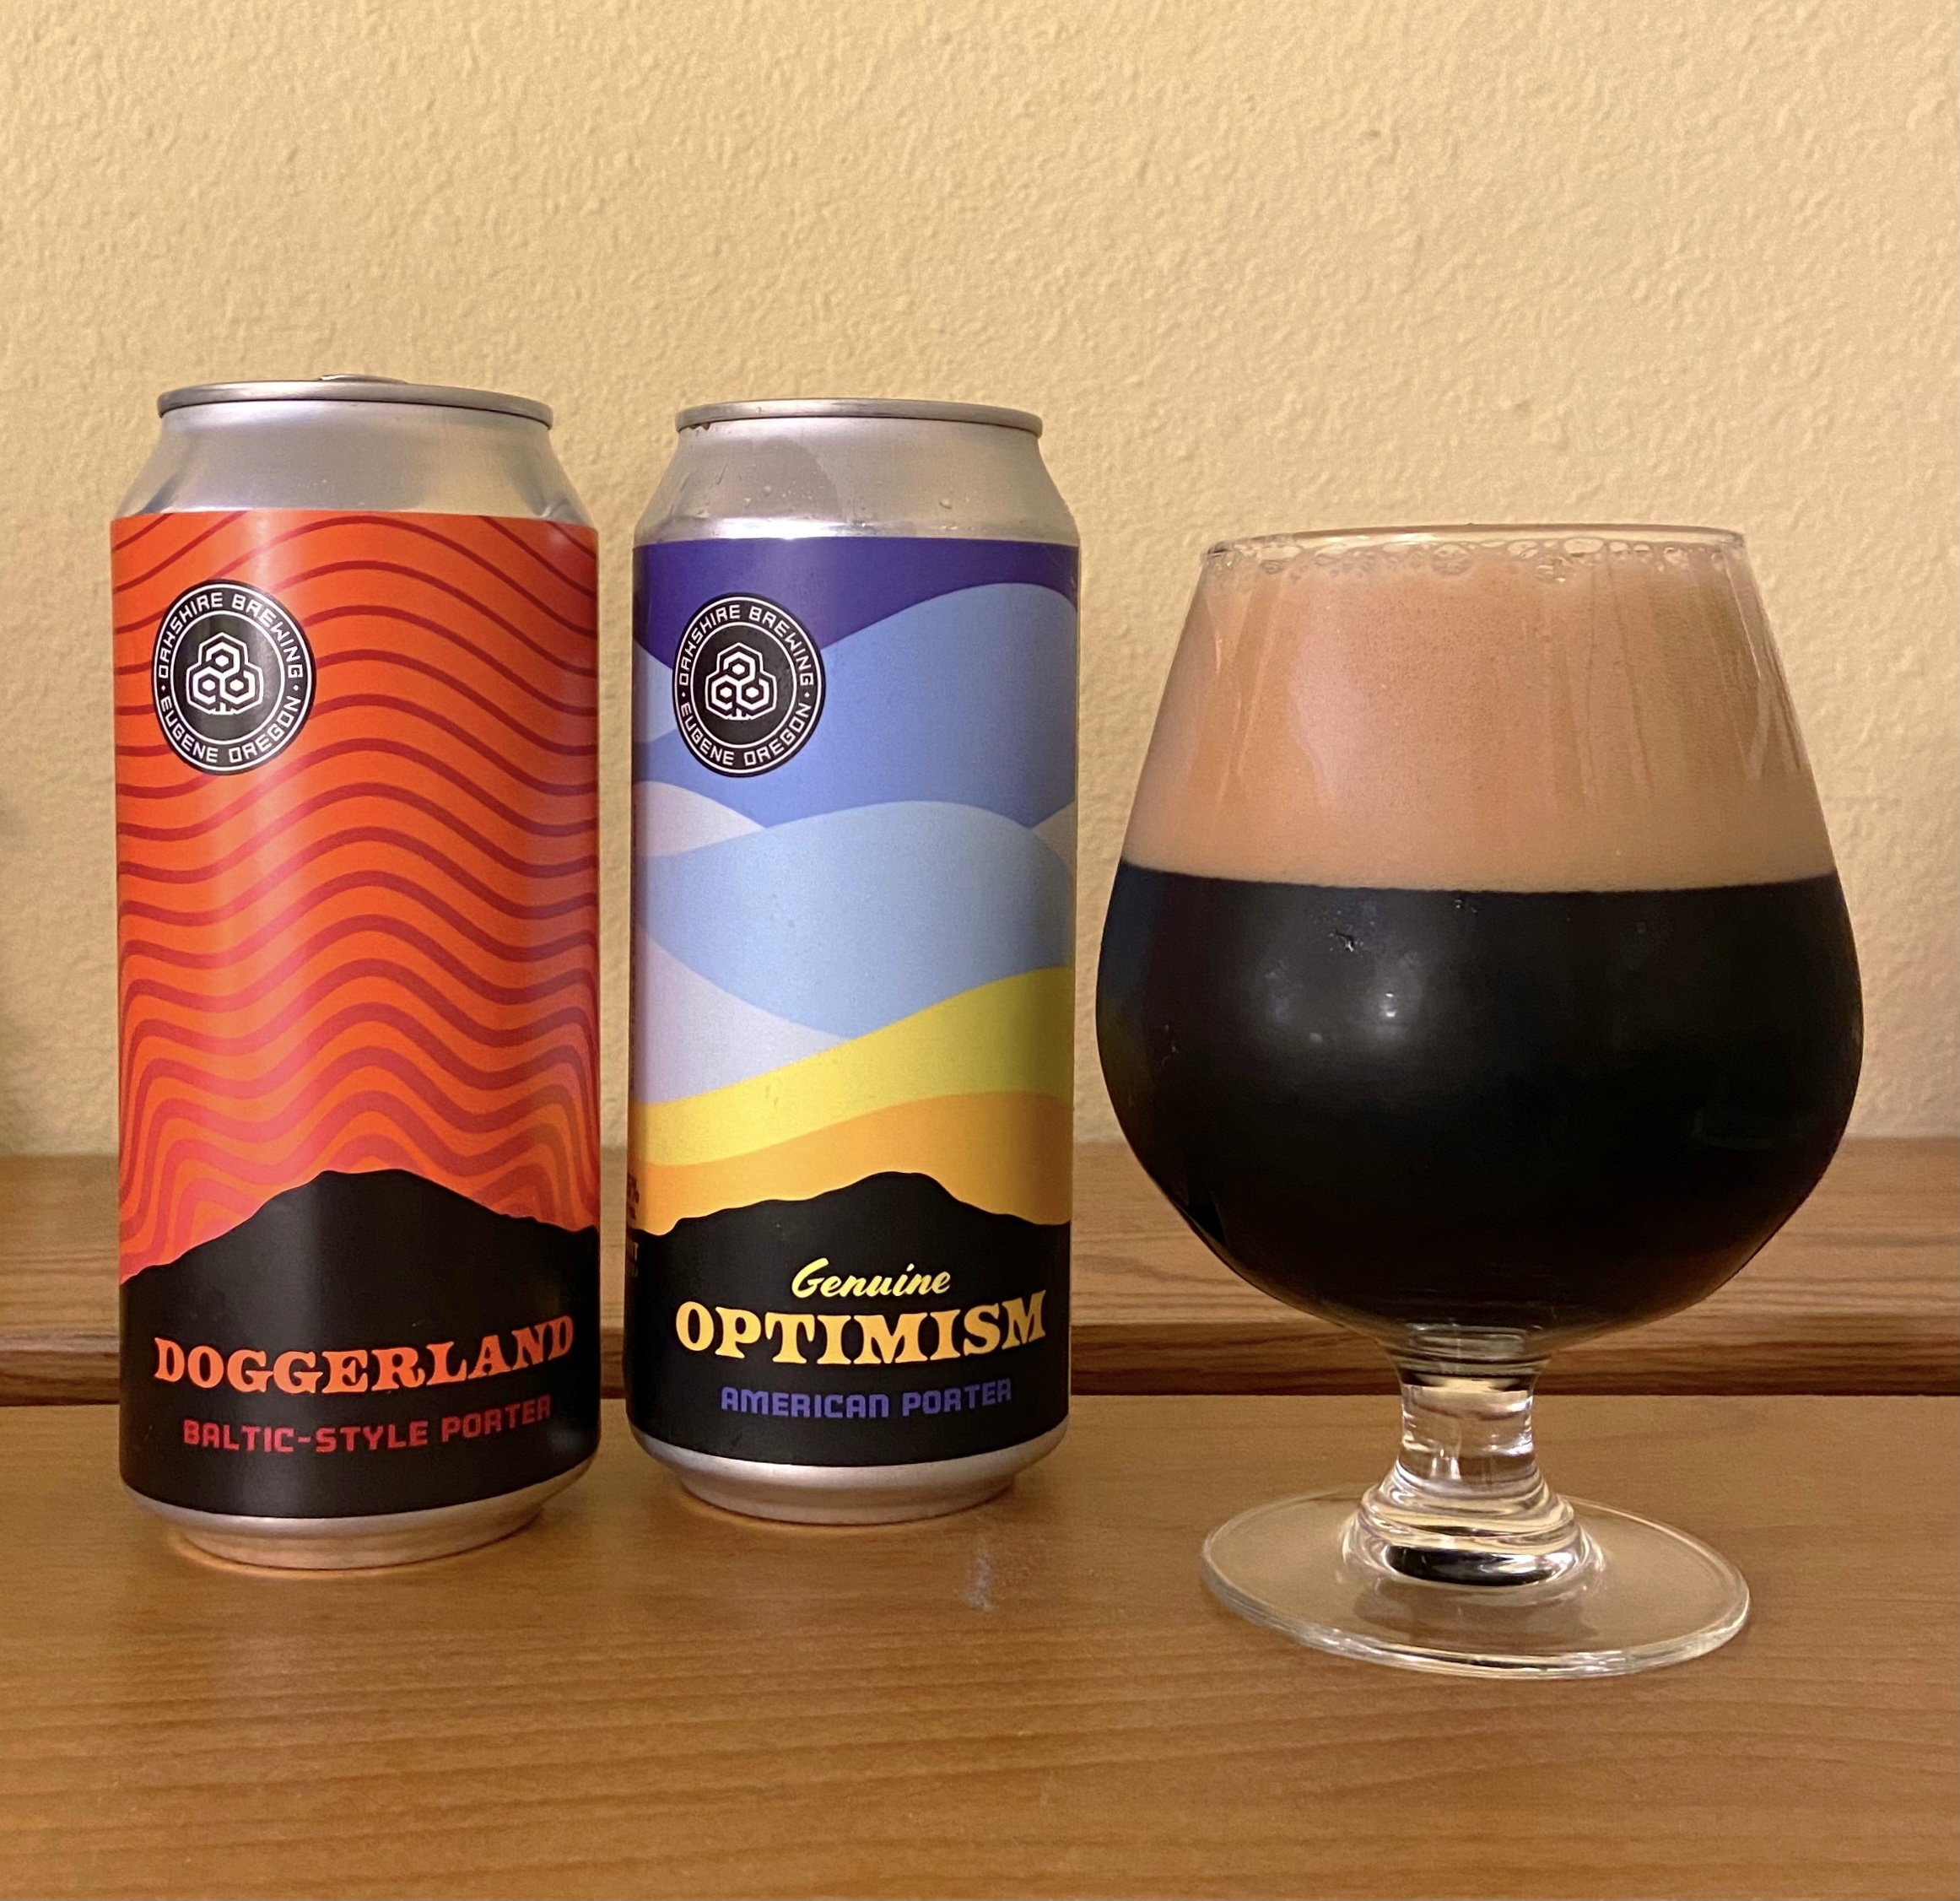 A glass pour of Genuine Optimism American Porter from Oakshire Brewing pictures alongside Doggerland Baltic-Style Porter